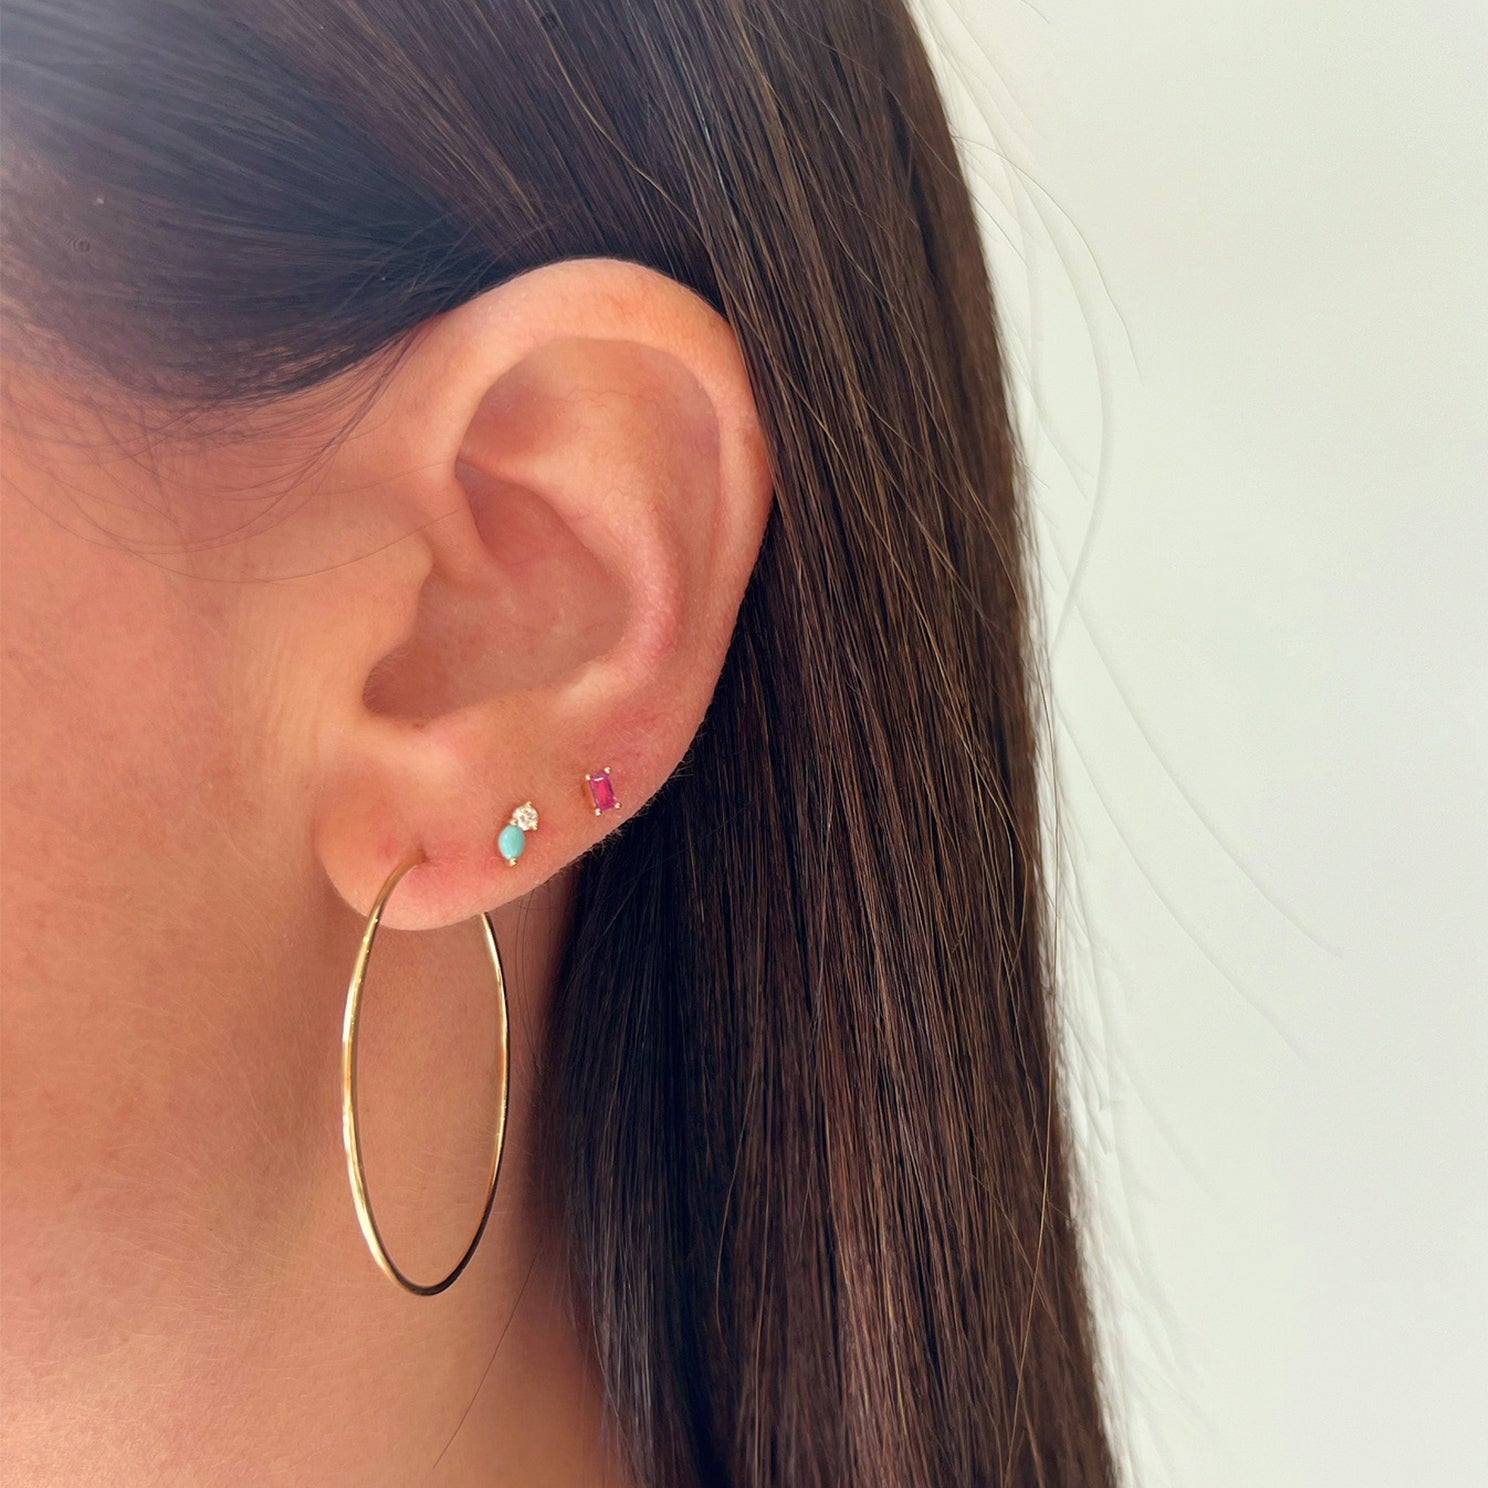 Double Treasure Stud Earring styled on second earring hole of model with gold hoop and pink stud earring